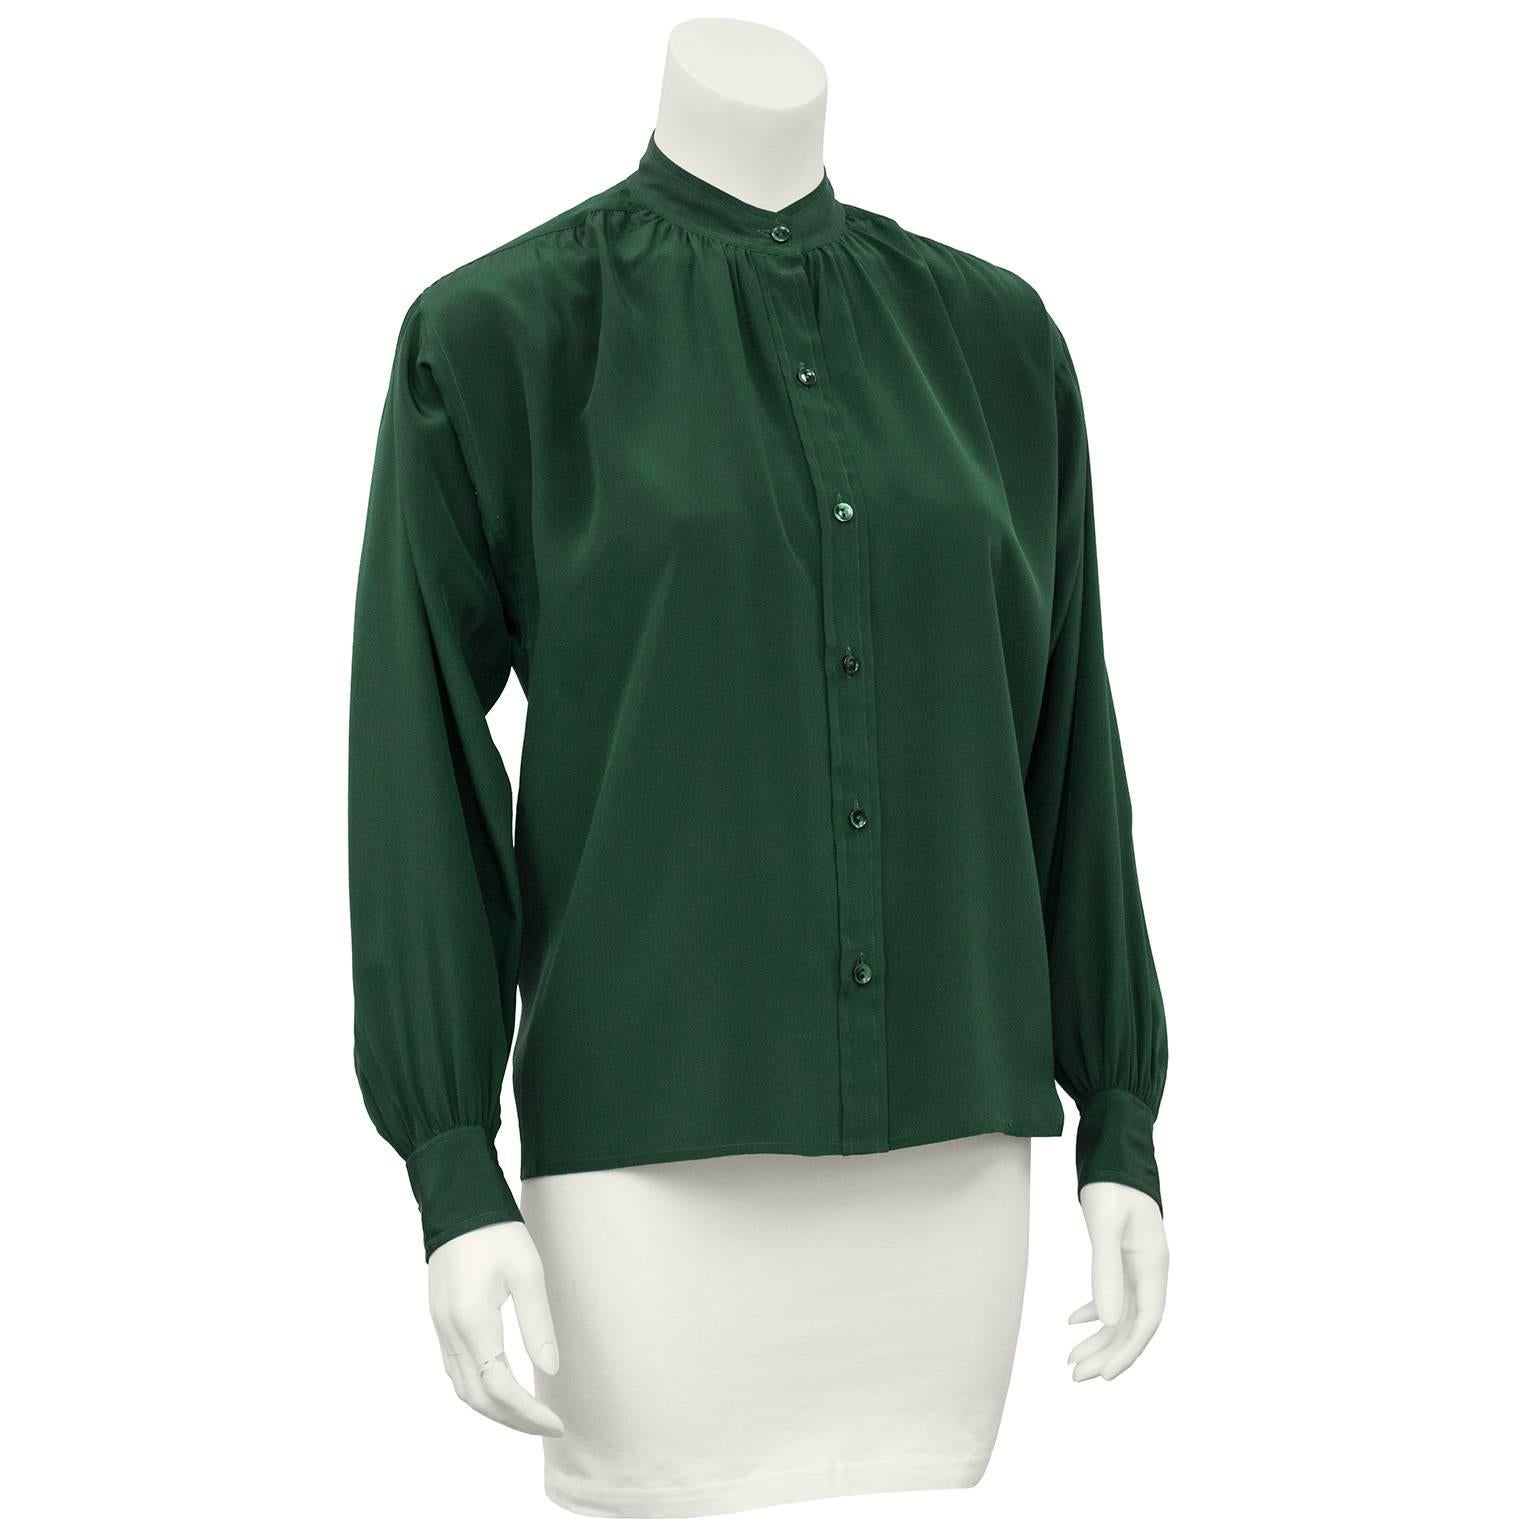 Classic Yves Saint Laurent blouse dating from the 1980s. Forest green silk with a Mandarin collar and slight dolman sleeves. Fits like a US 6. Excellent vintage condition. 

Sleeve 21" Shoulder 24" Bust 40" Waist 40" Hips